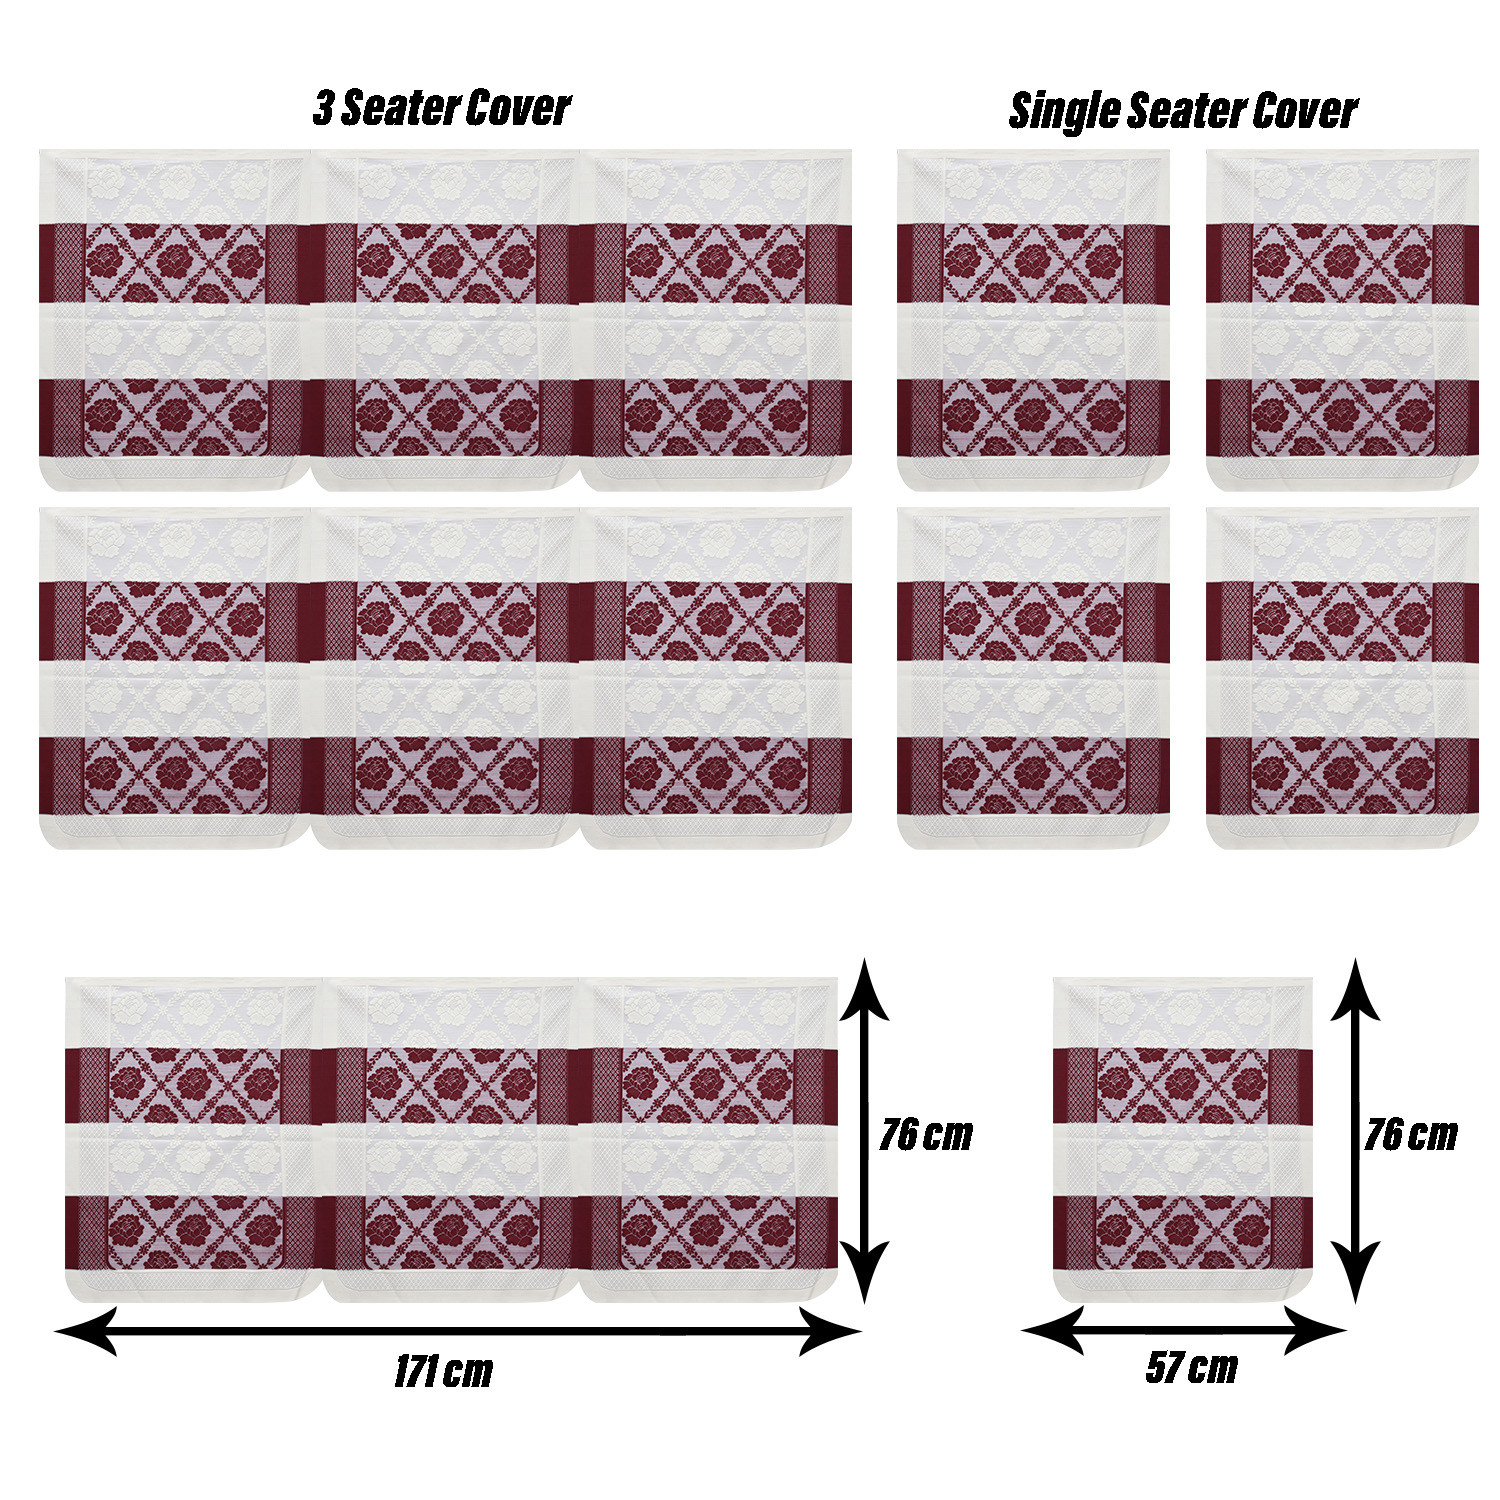 Kuber Industries Sofa Cover | Cotton Net Maroon Flower Patta Sofa Cover | 5-Seater Sofa Cover for Home Decor | Sofa cover Set for Living room | Maroon